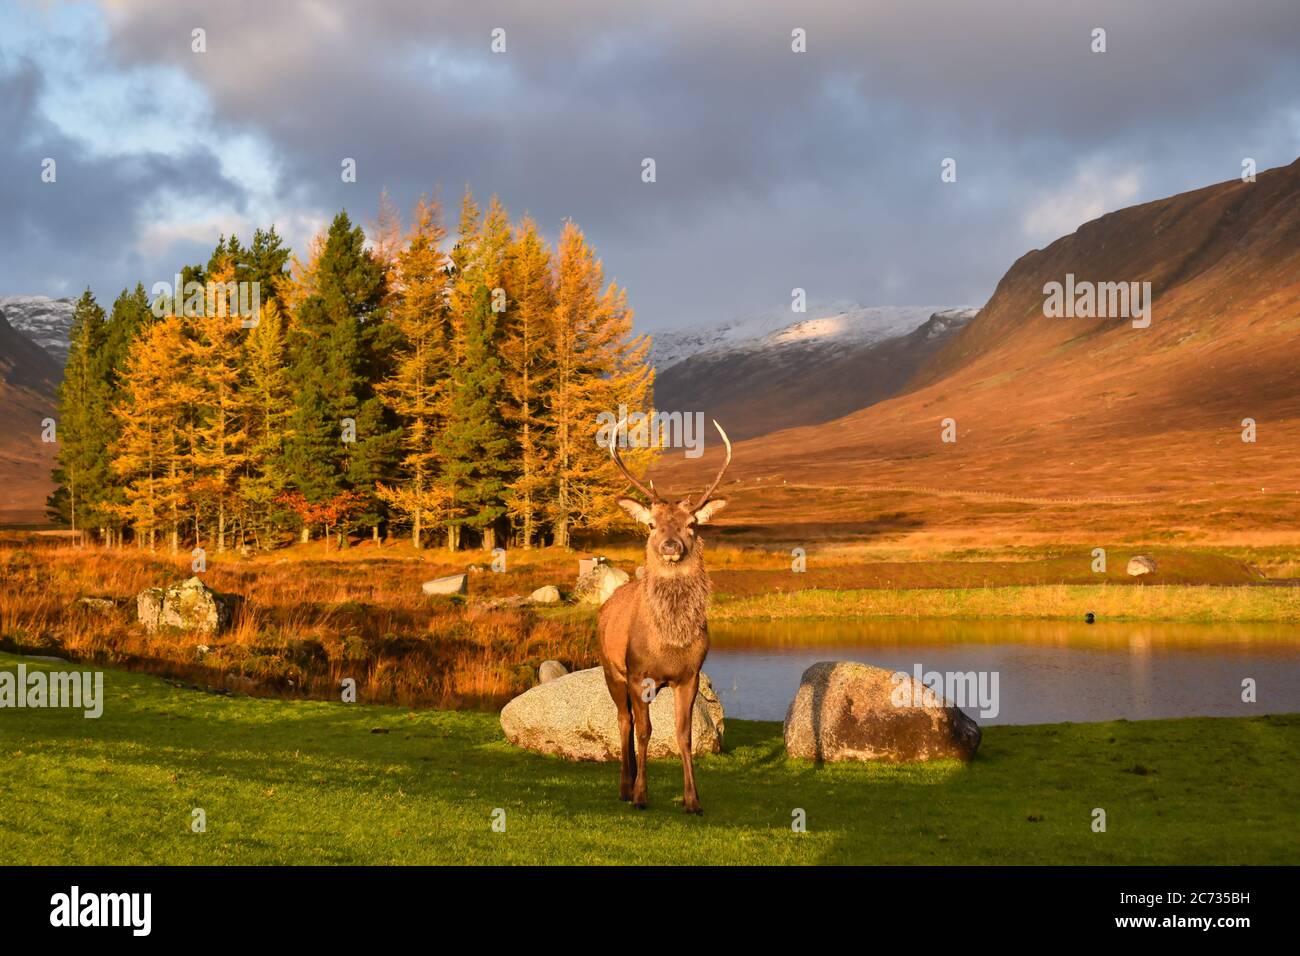 Majestic stag facing forwards in stunning Glencoe landscape. Still water with reflections, tall trees, mountains and dramatic cloudy sky. Stock Photo